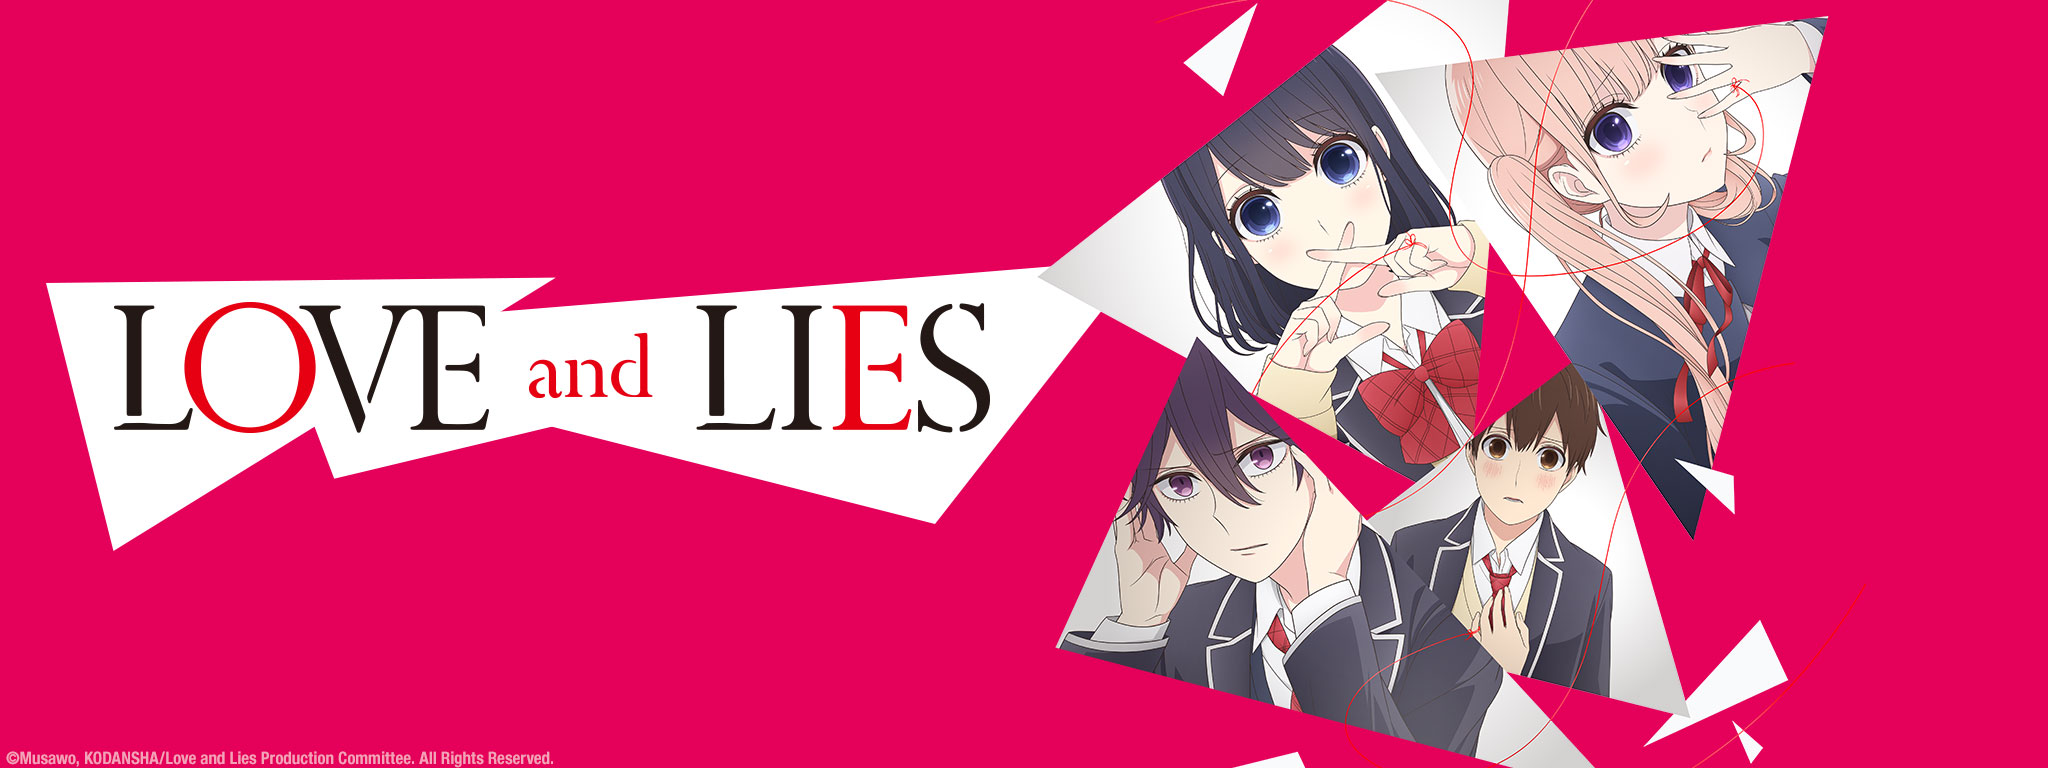 Title Art for LOVE and LIES